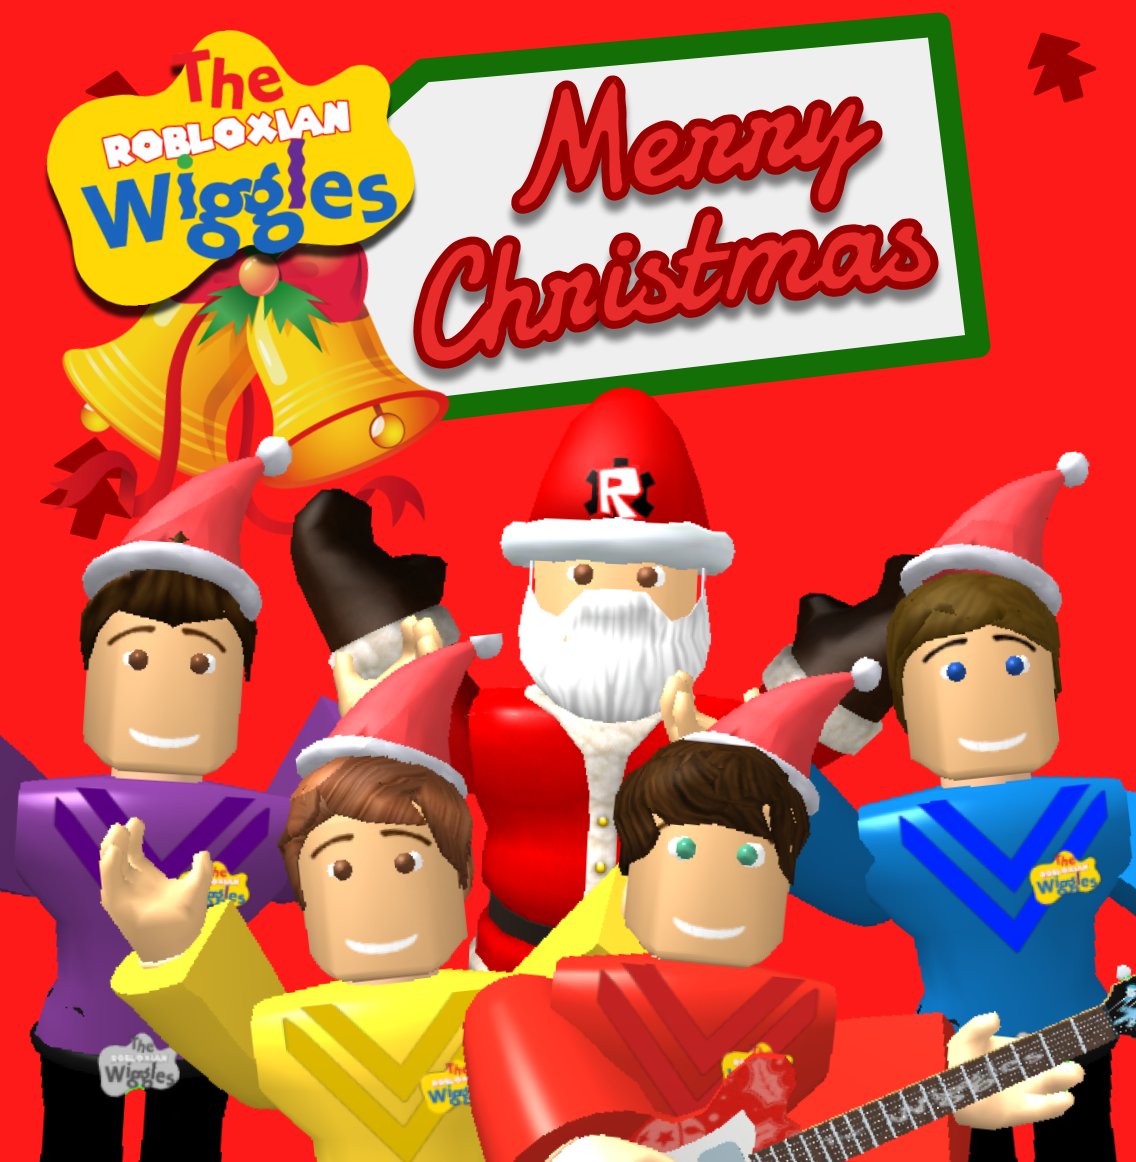 The Robloxian Wiggles On Twitter Wishing Everyone A Very Merry